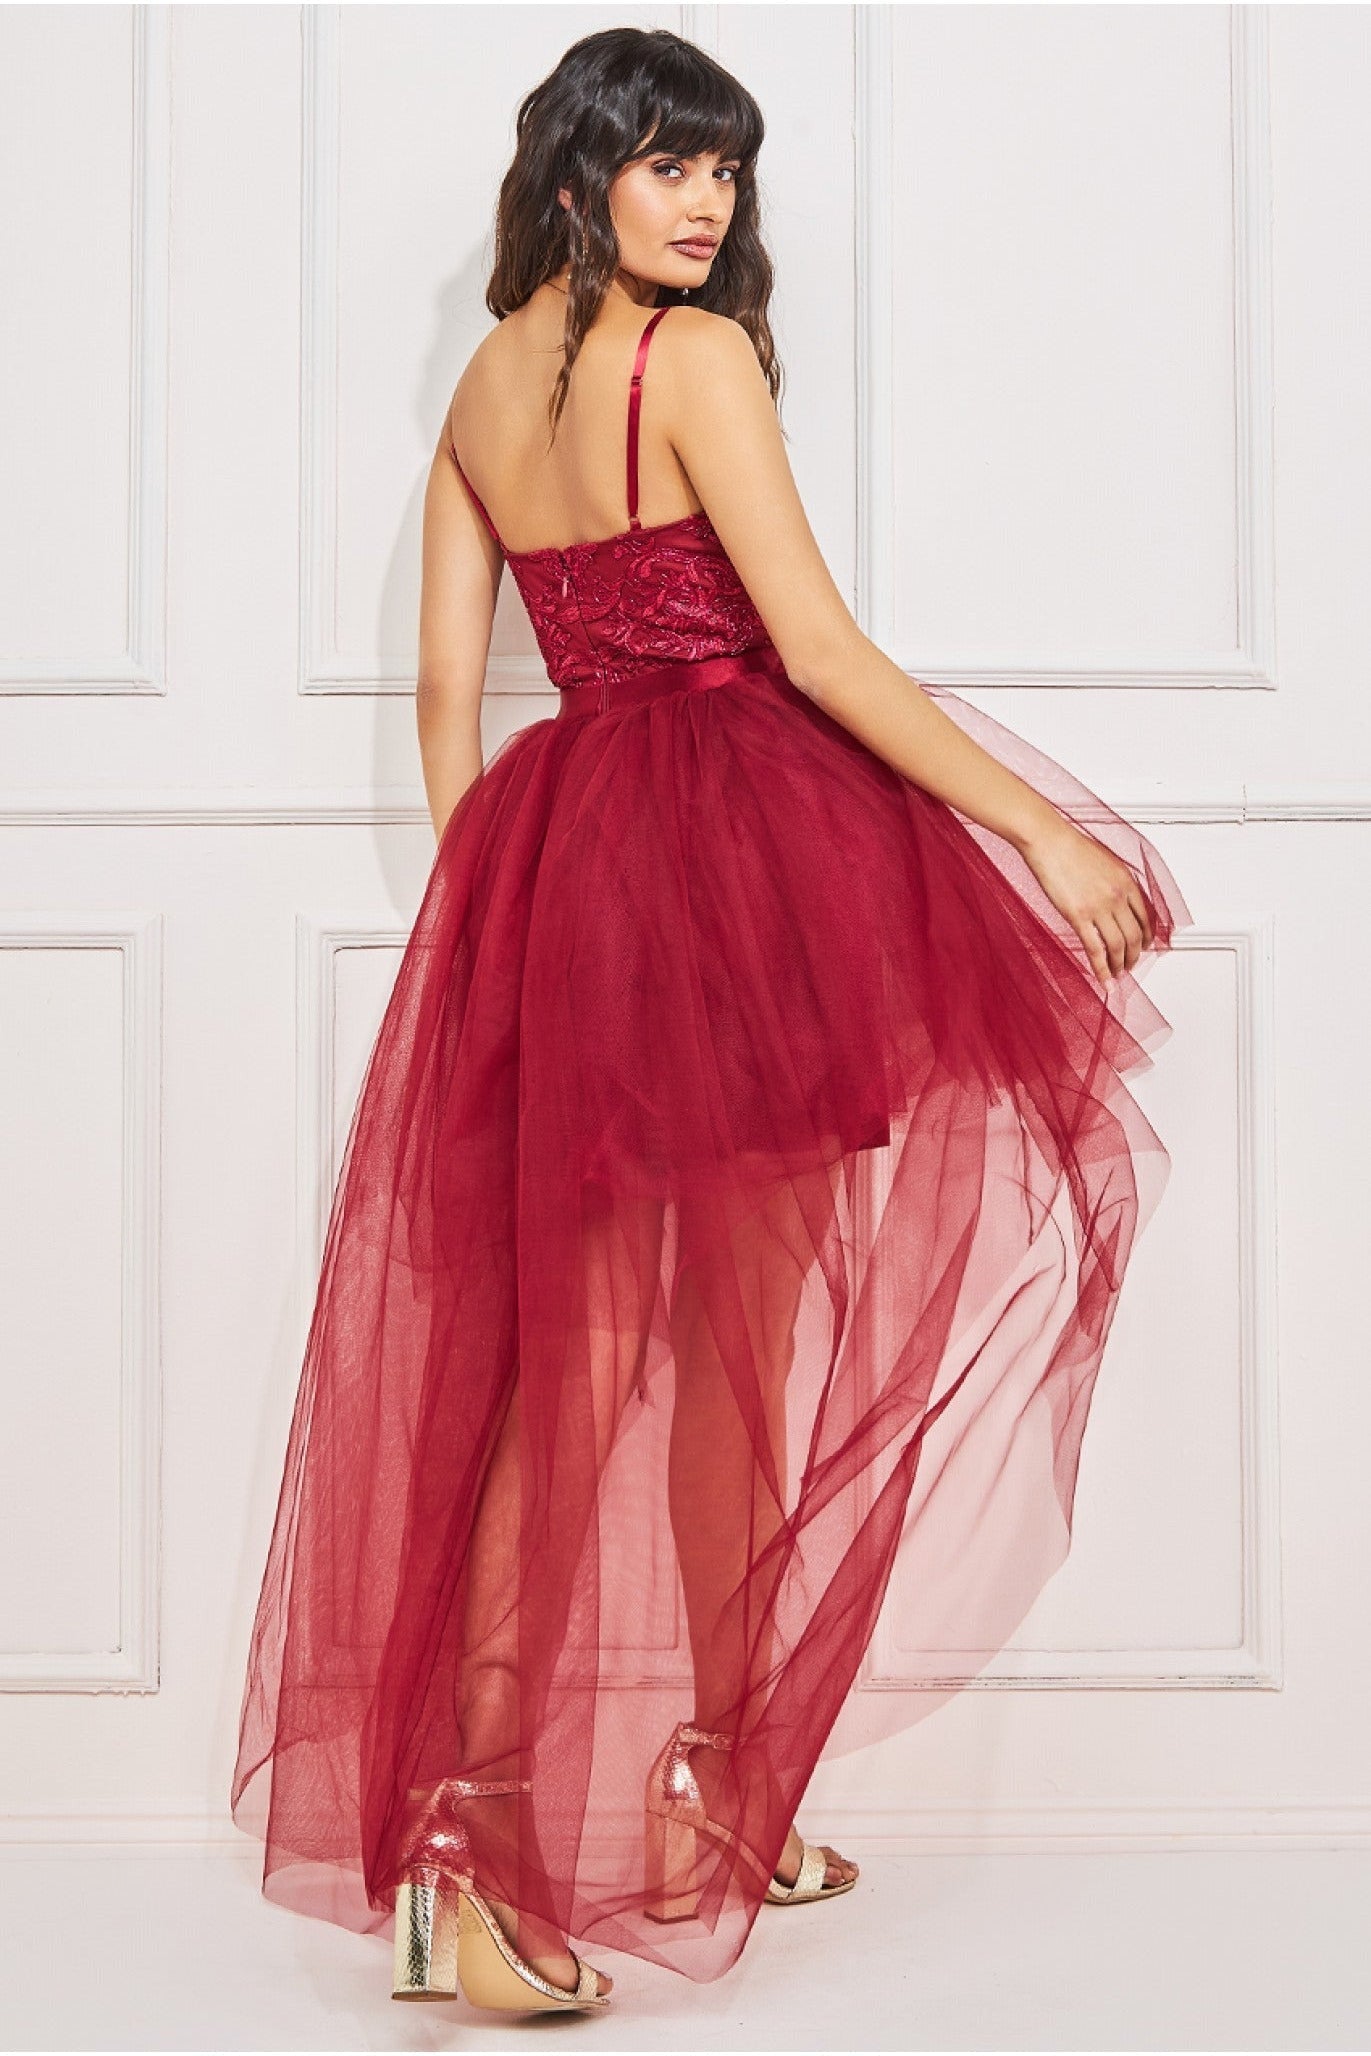 High Low Tulle Mini With Lace Bodice - Wine DR3061